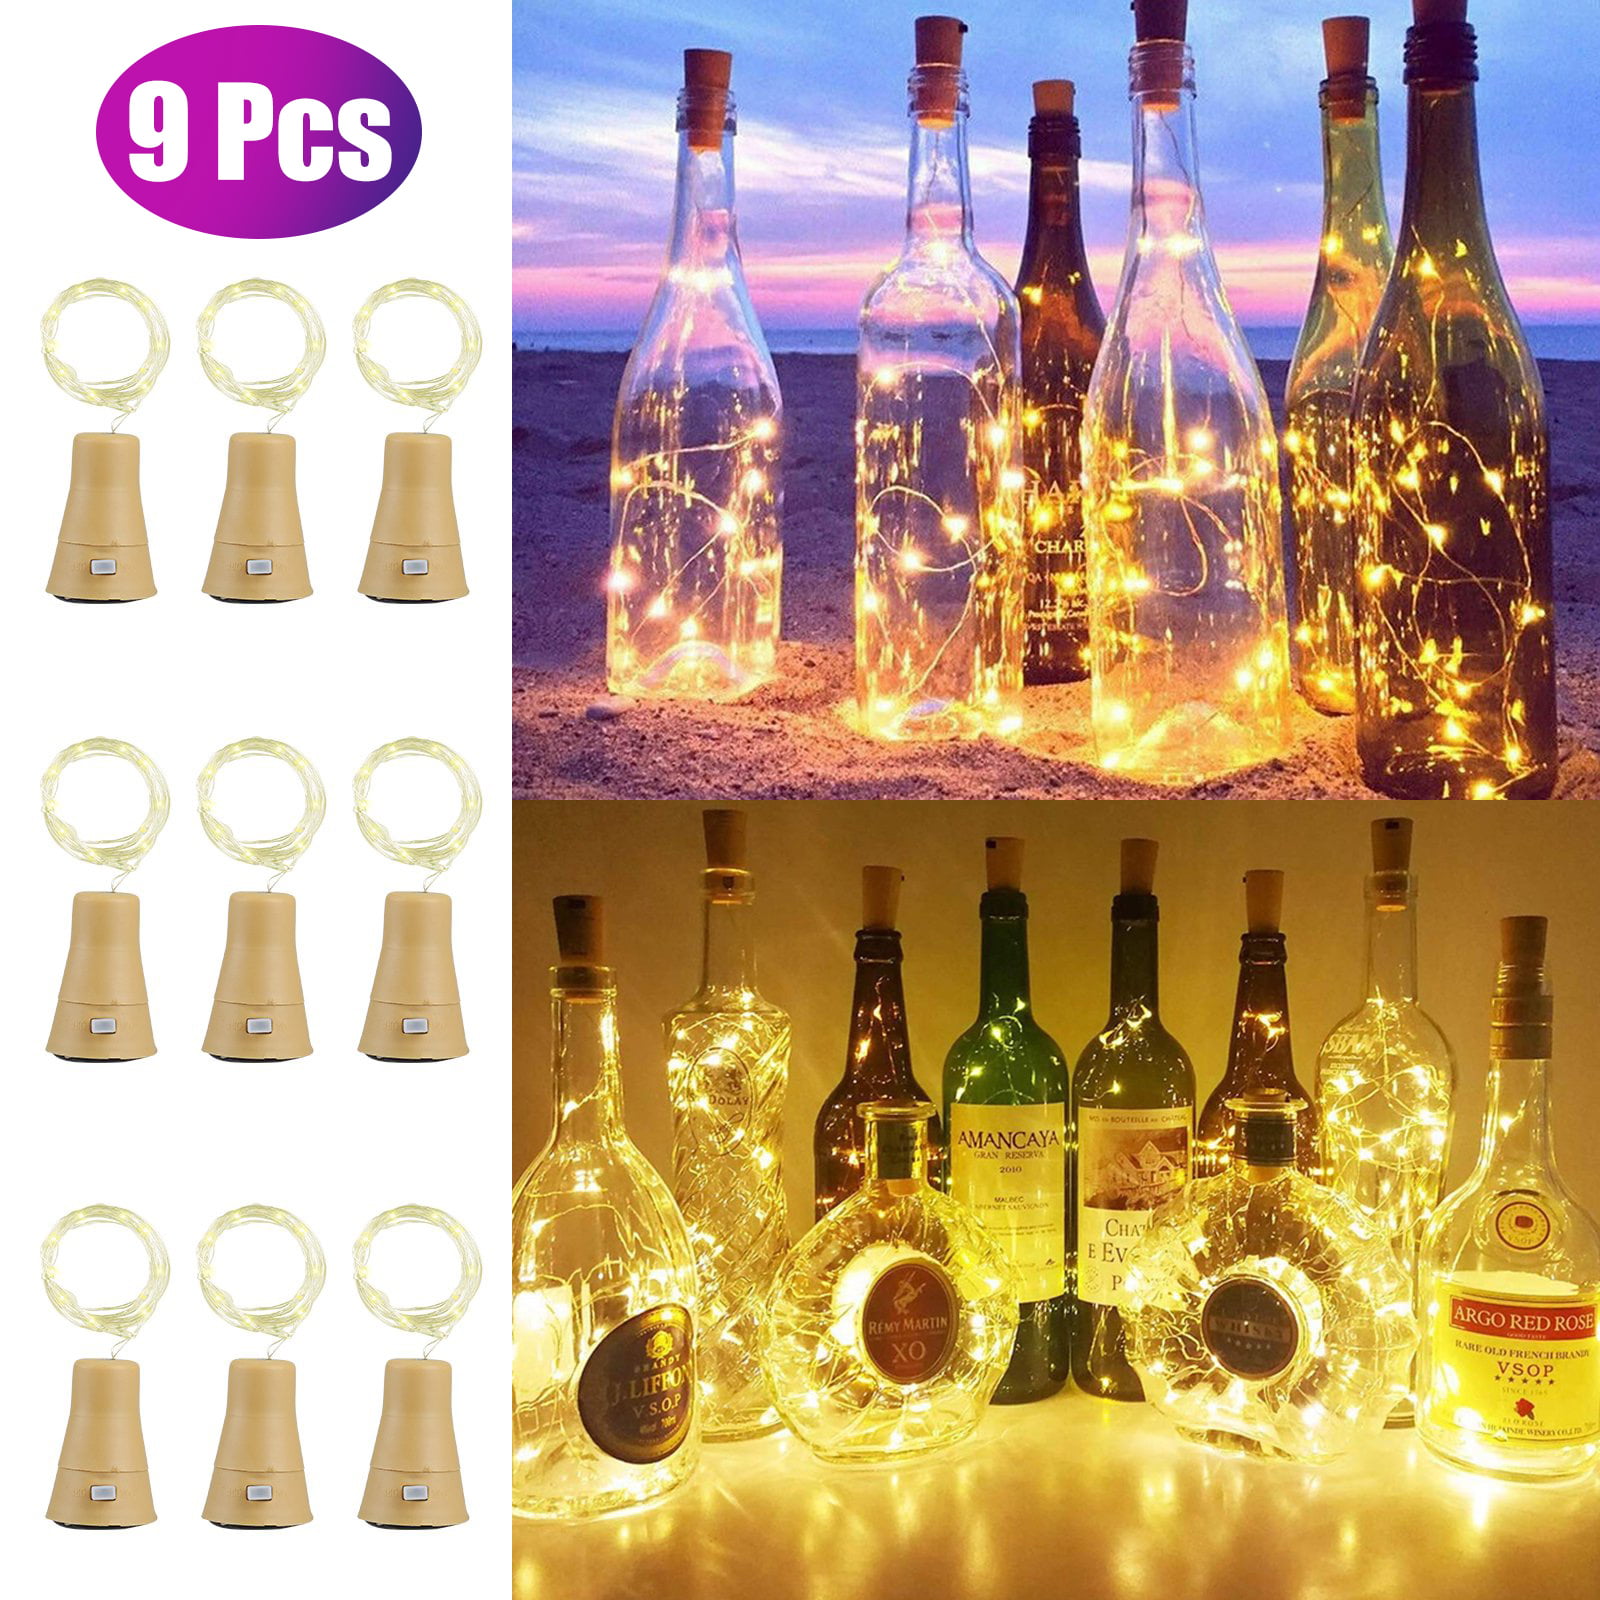 6 ft long copper wire String lights 20 LED Fairy Battery Operated Cork lights 